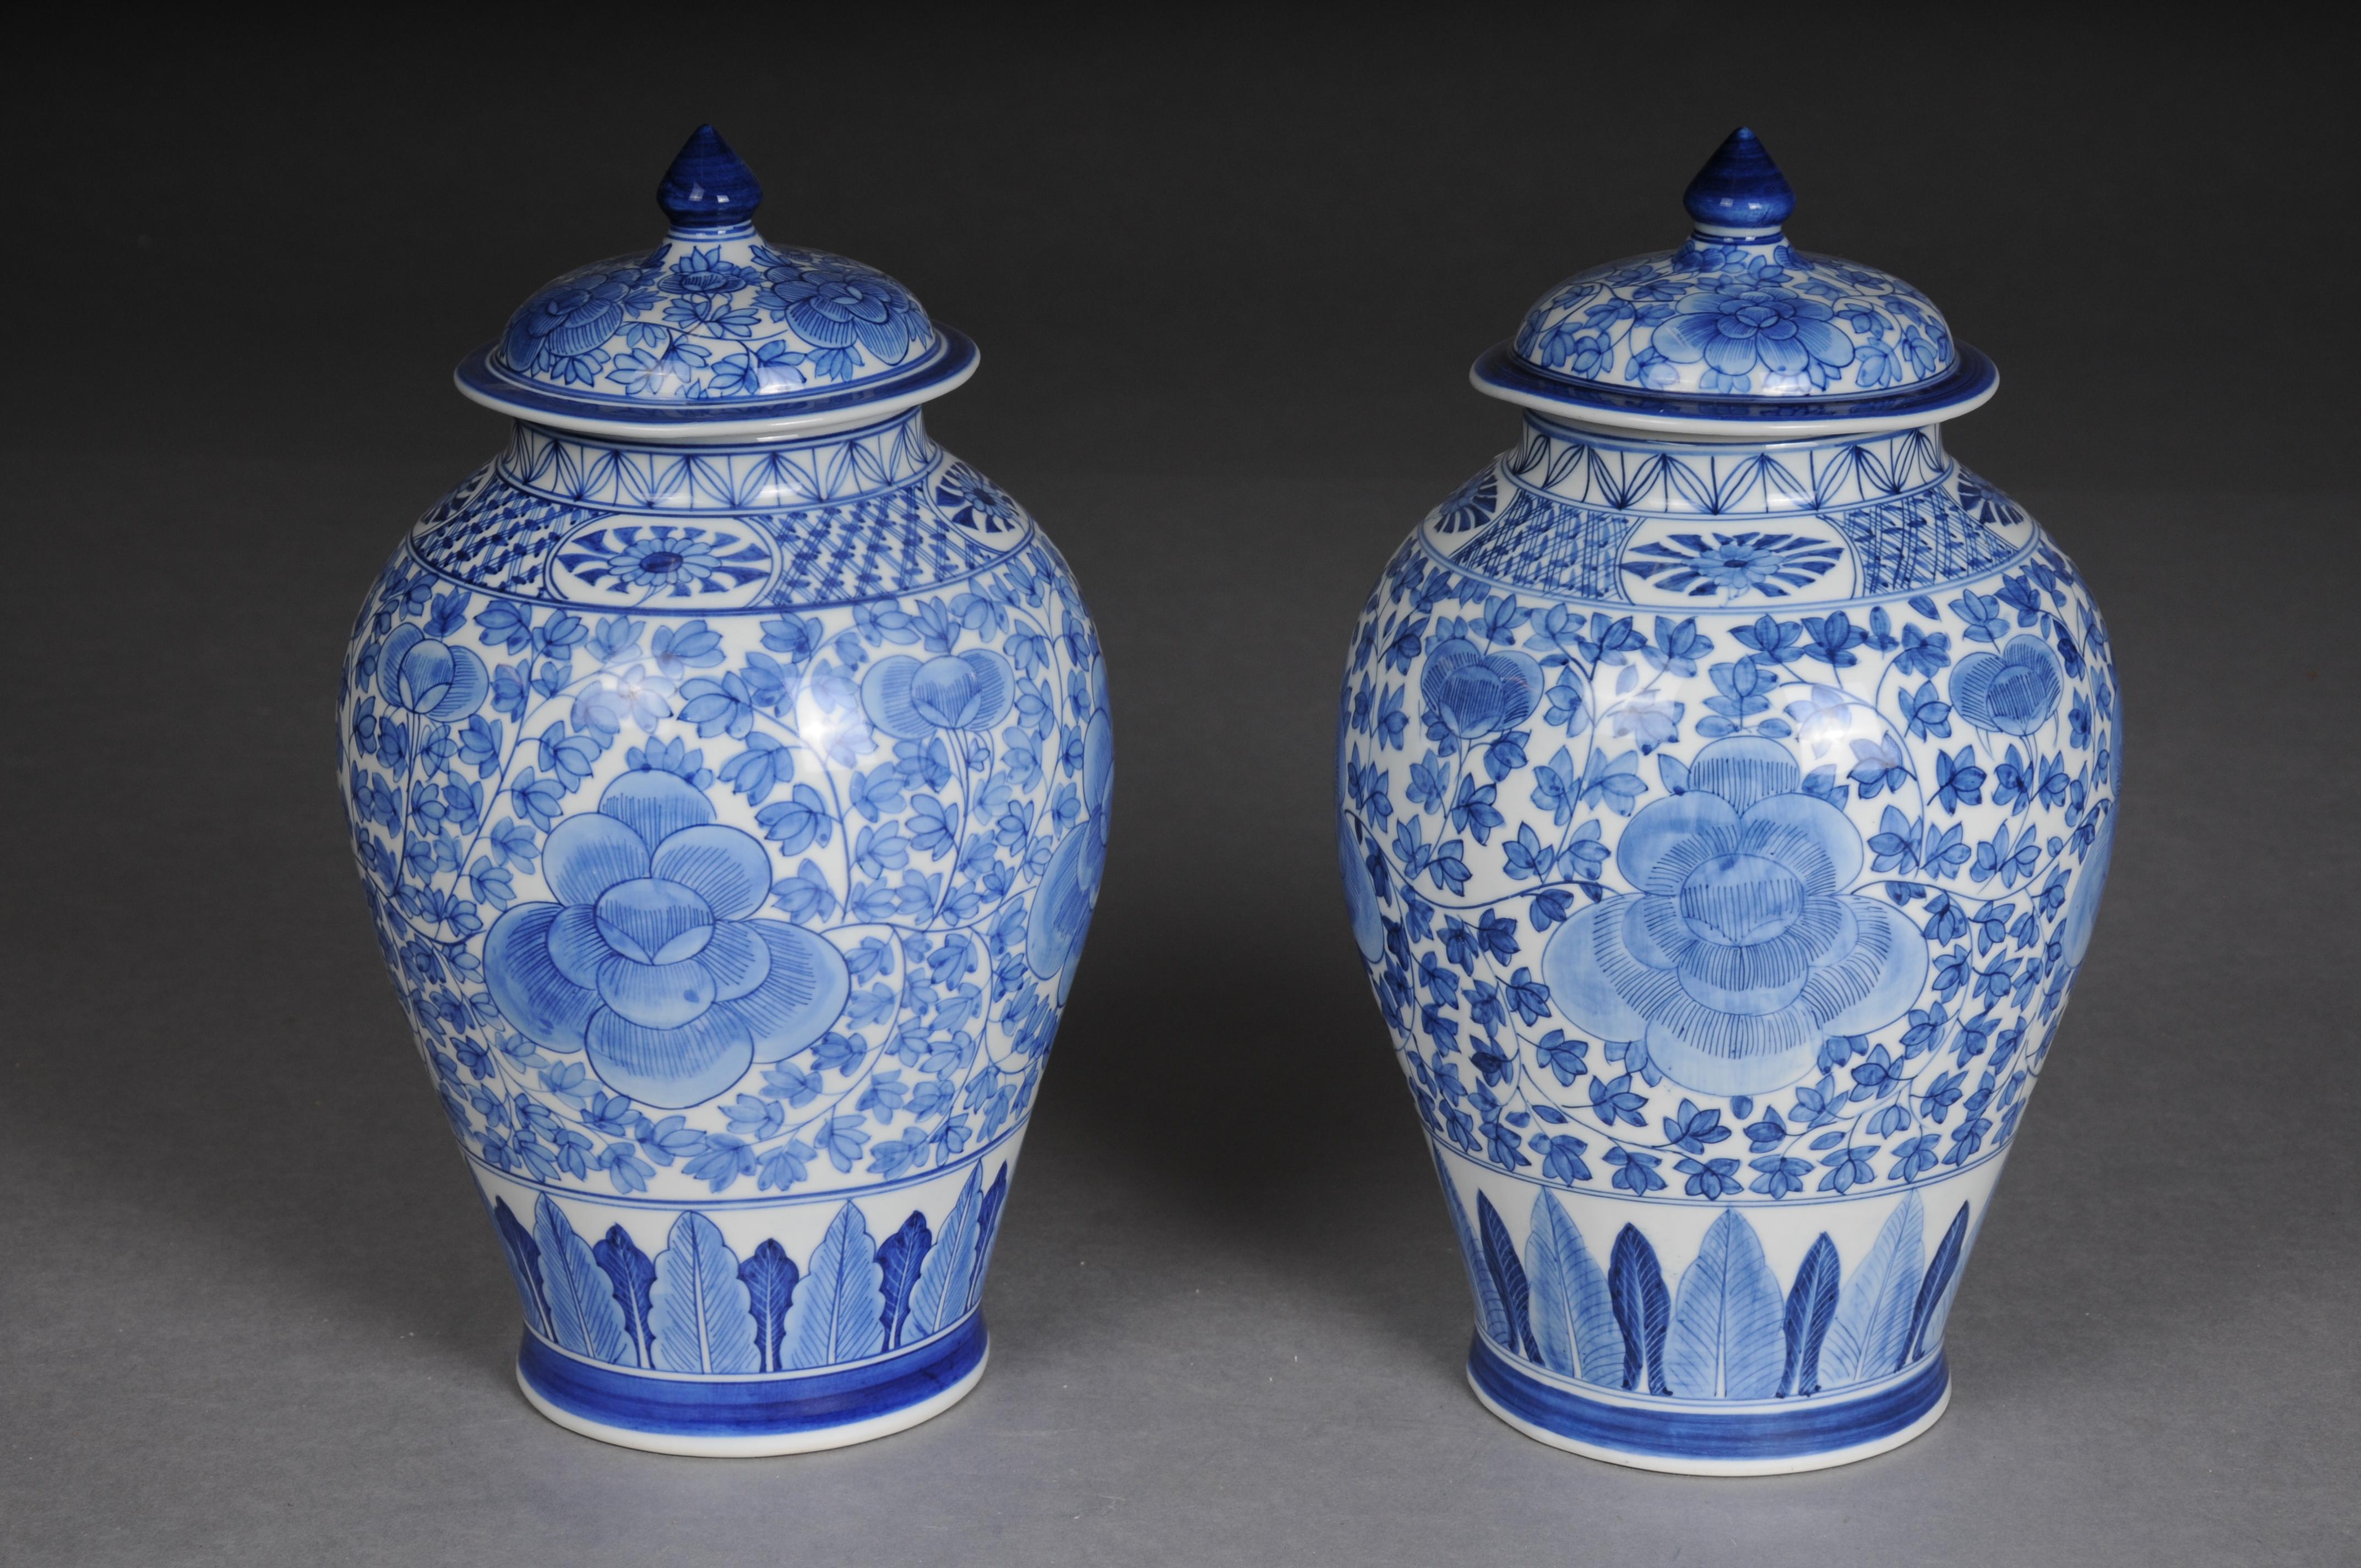 Pair of Asian lidded vases, porcelain, 20th century.

Porcelain, blue painting with Asian design. Bulbous body with a curved lid crowned with a pointed knob.
A very beautiful pair with a lot of charm and style. Very decorative and suitable for any